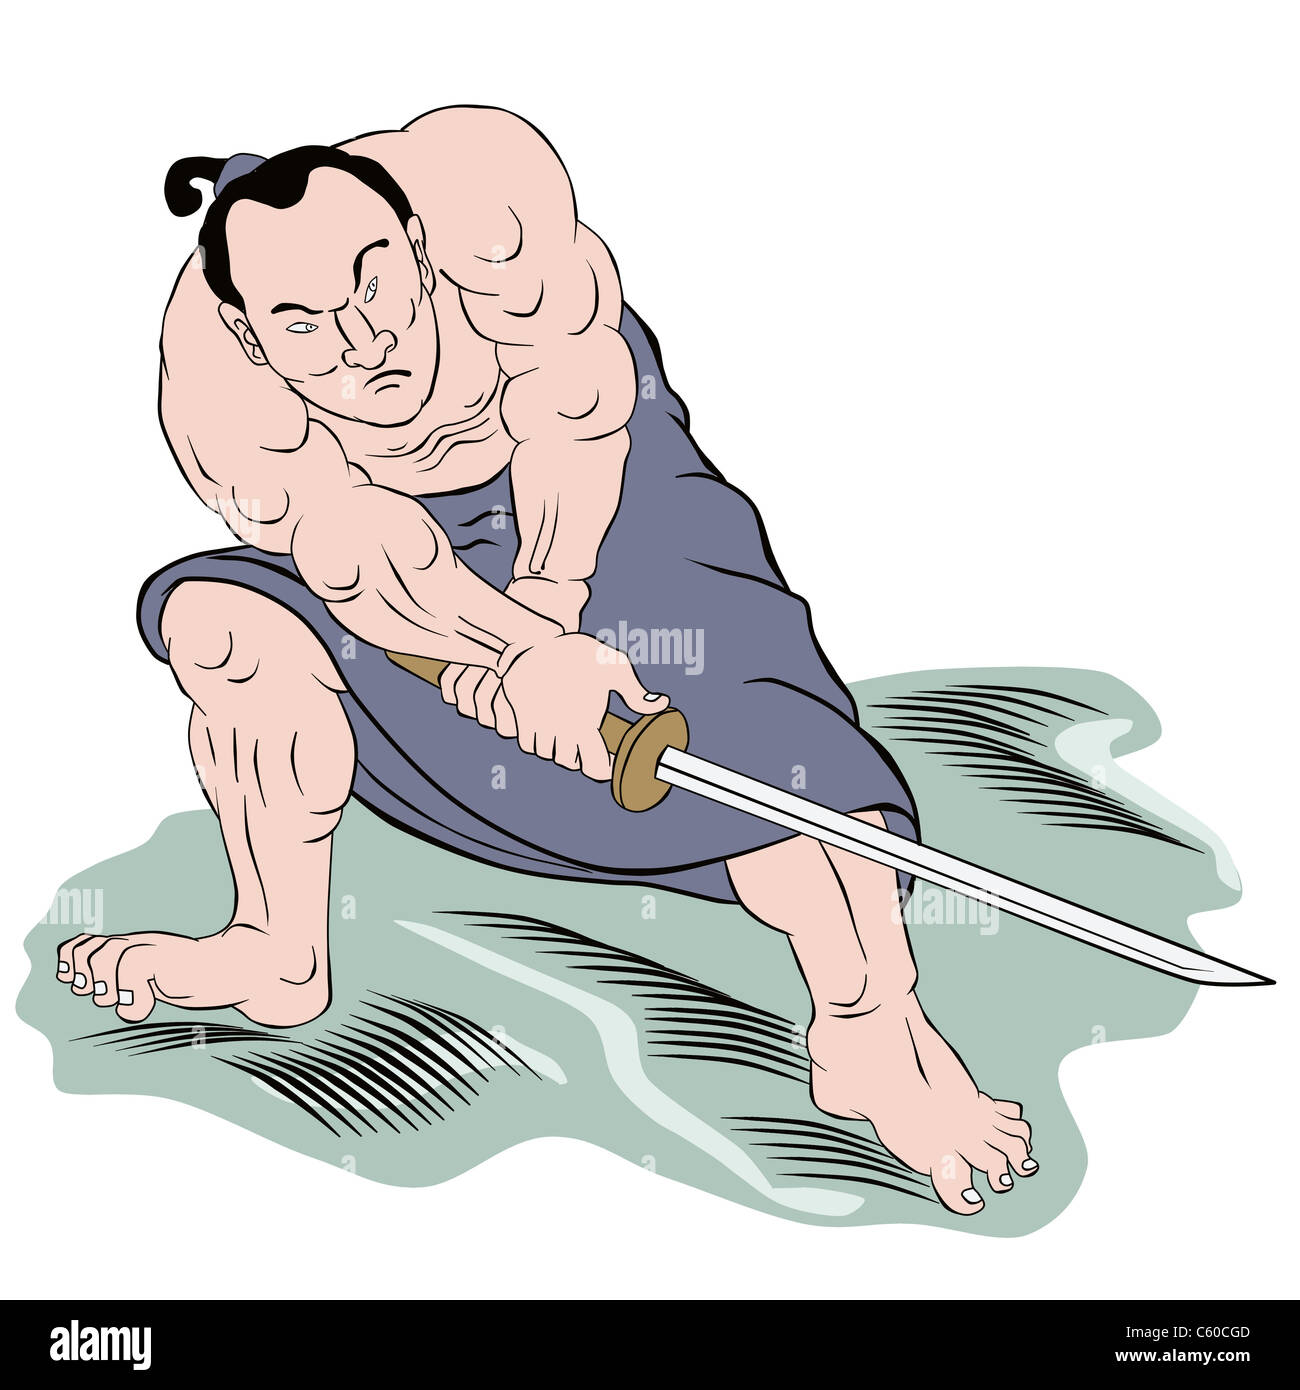 illustration of a Samurai warrior with katana sword in fighting stance done in cartoon style Stock Photo